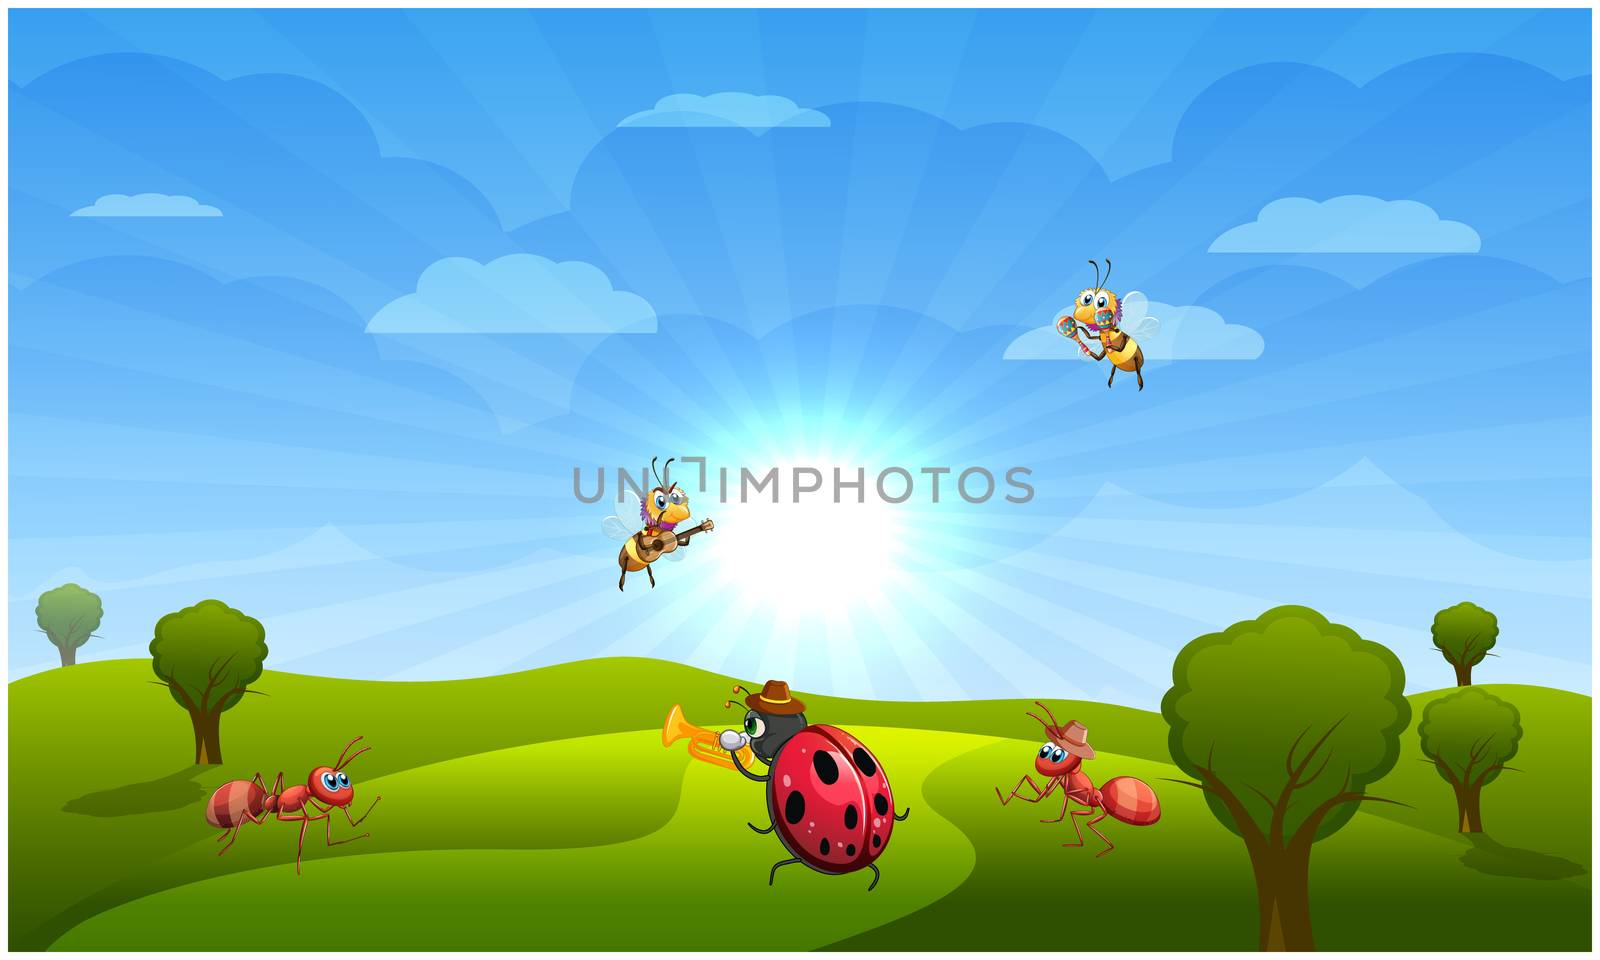 insects are playing music in garden by aanavcreationsplus